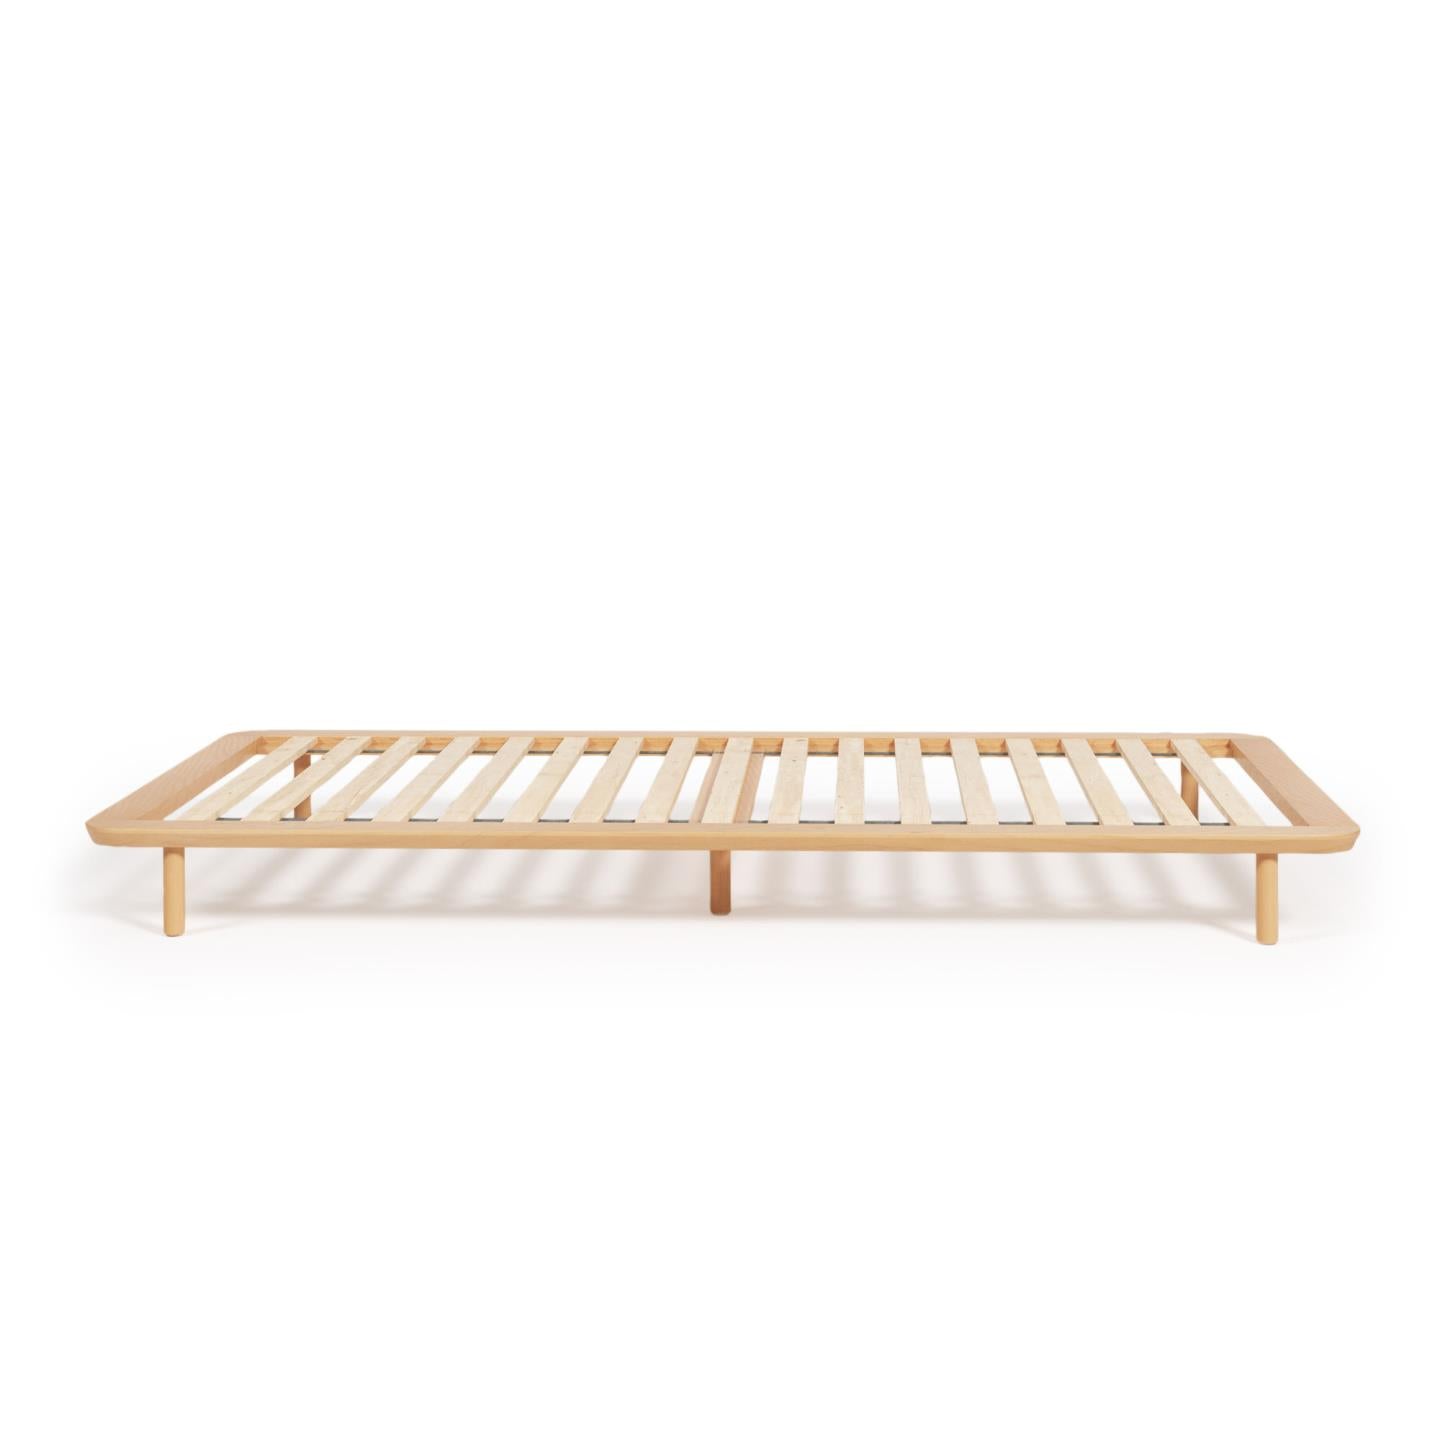 Anielle bed made from solid ash wood for a 90 x 200 cm mattress